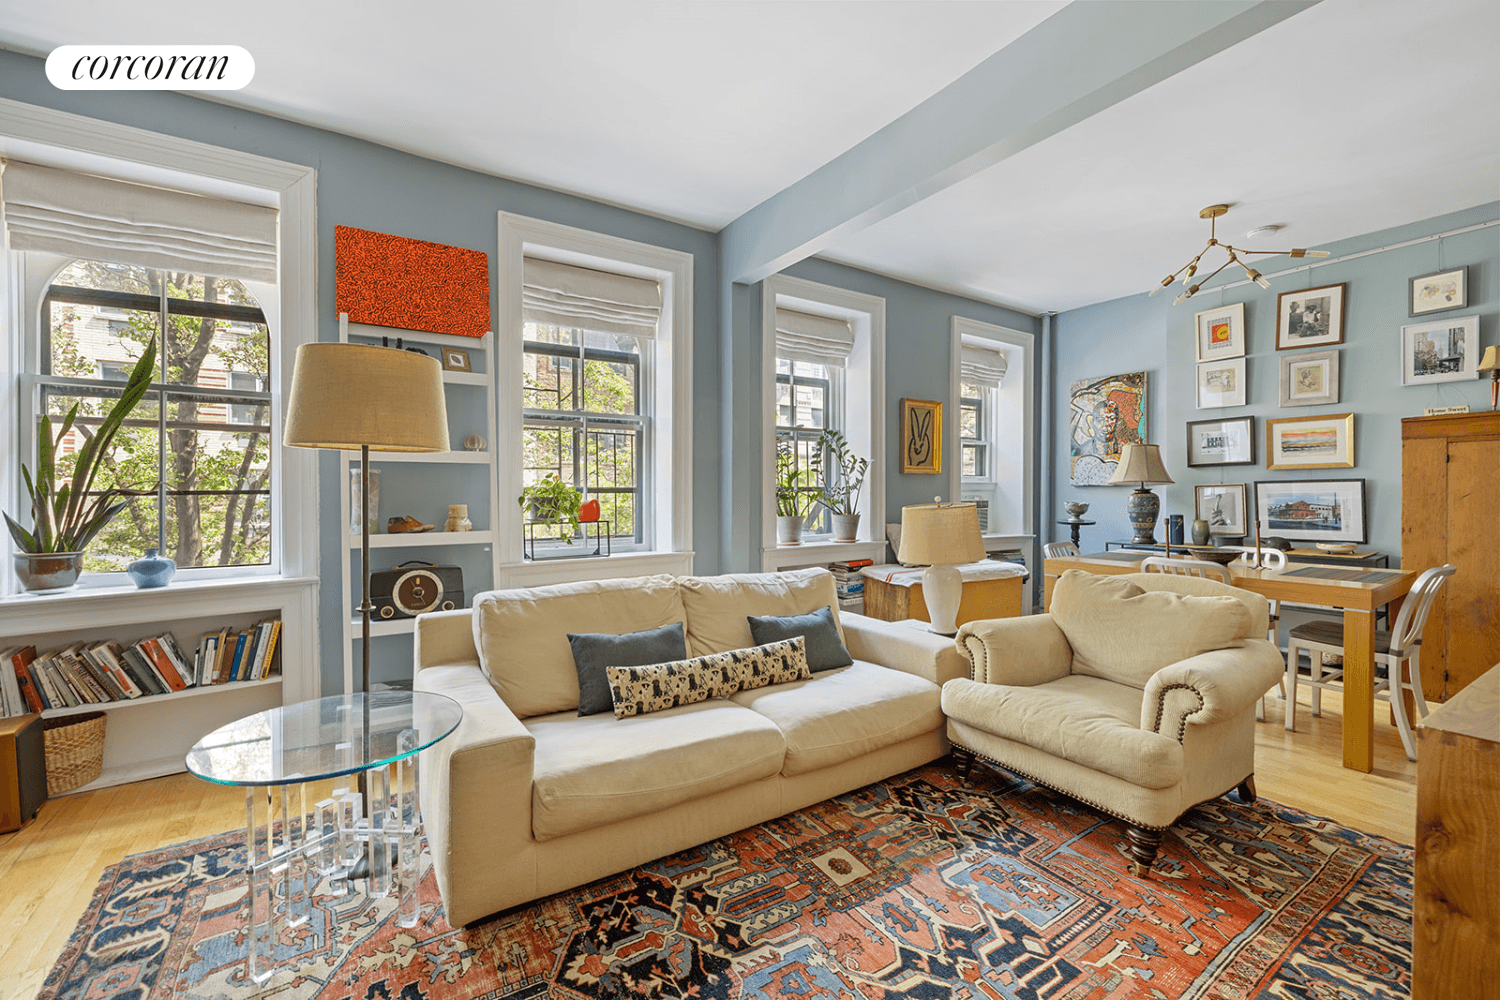 Around the corner from Thompkins' Square Park in the East Village, a neighborhood rich in music and art history, this stunning two bedroom apartment is currently configured as an oversized ...